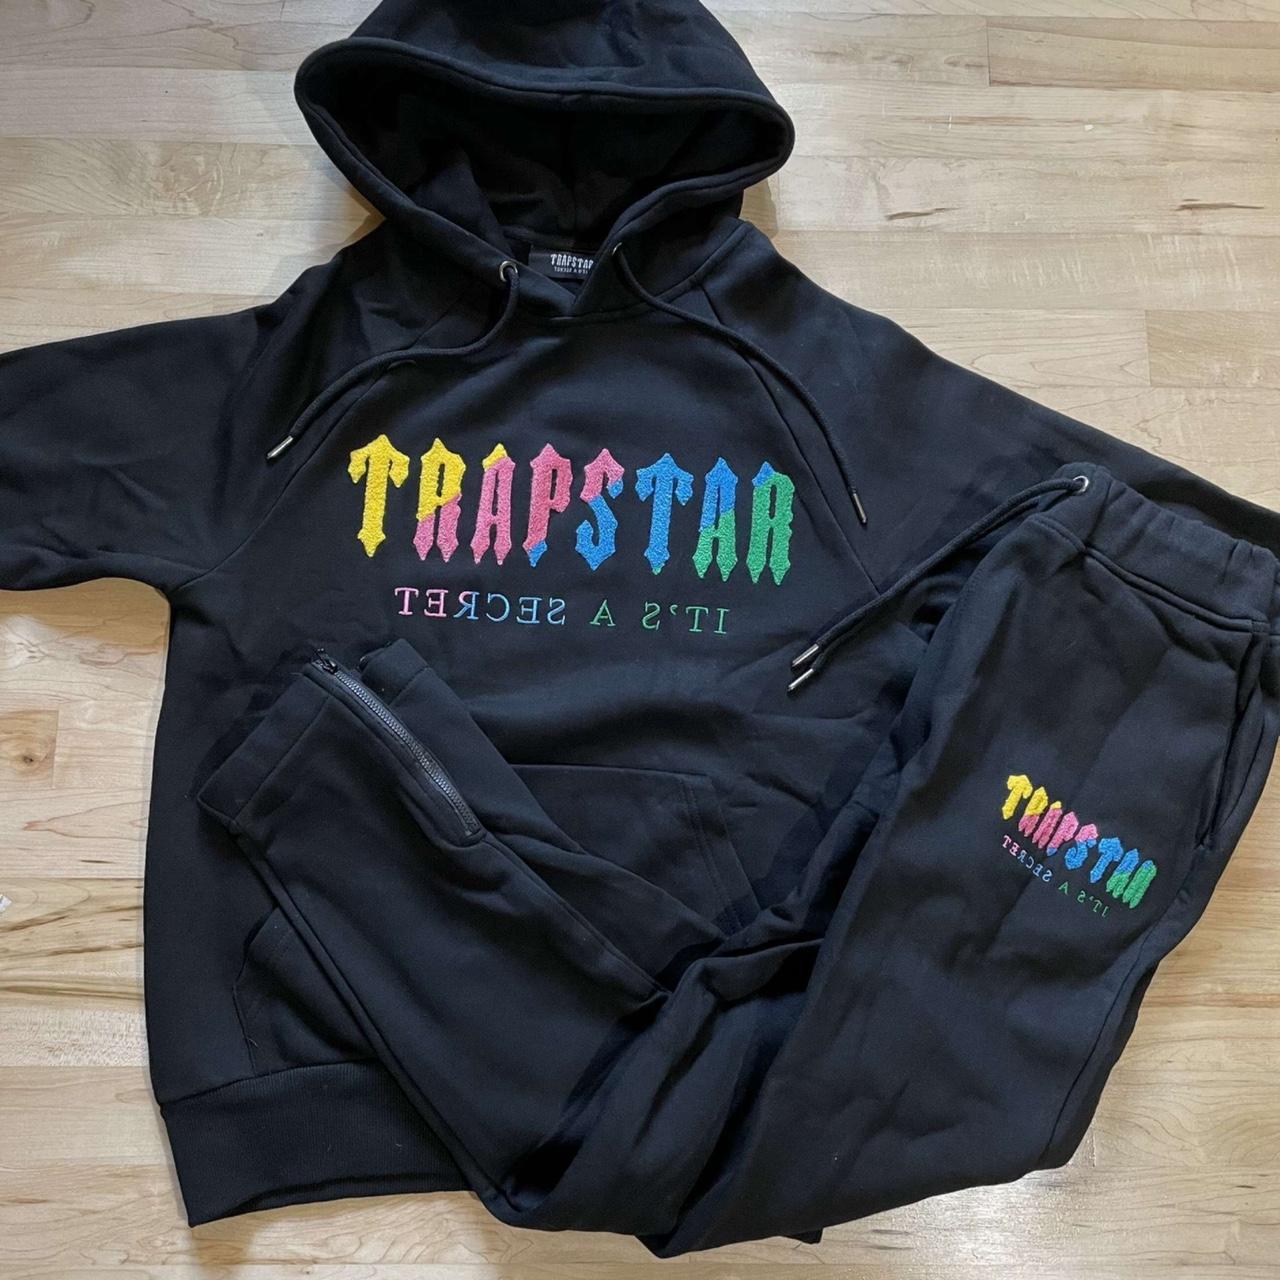 Trapstar candy tracksuit size M mens. Wore twice - Depop